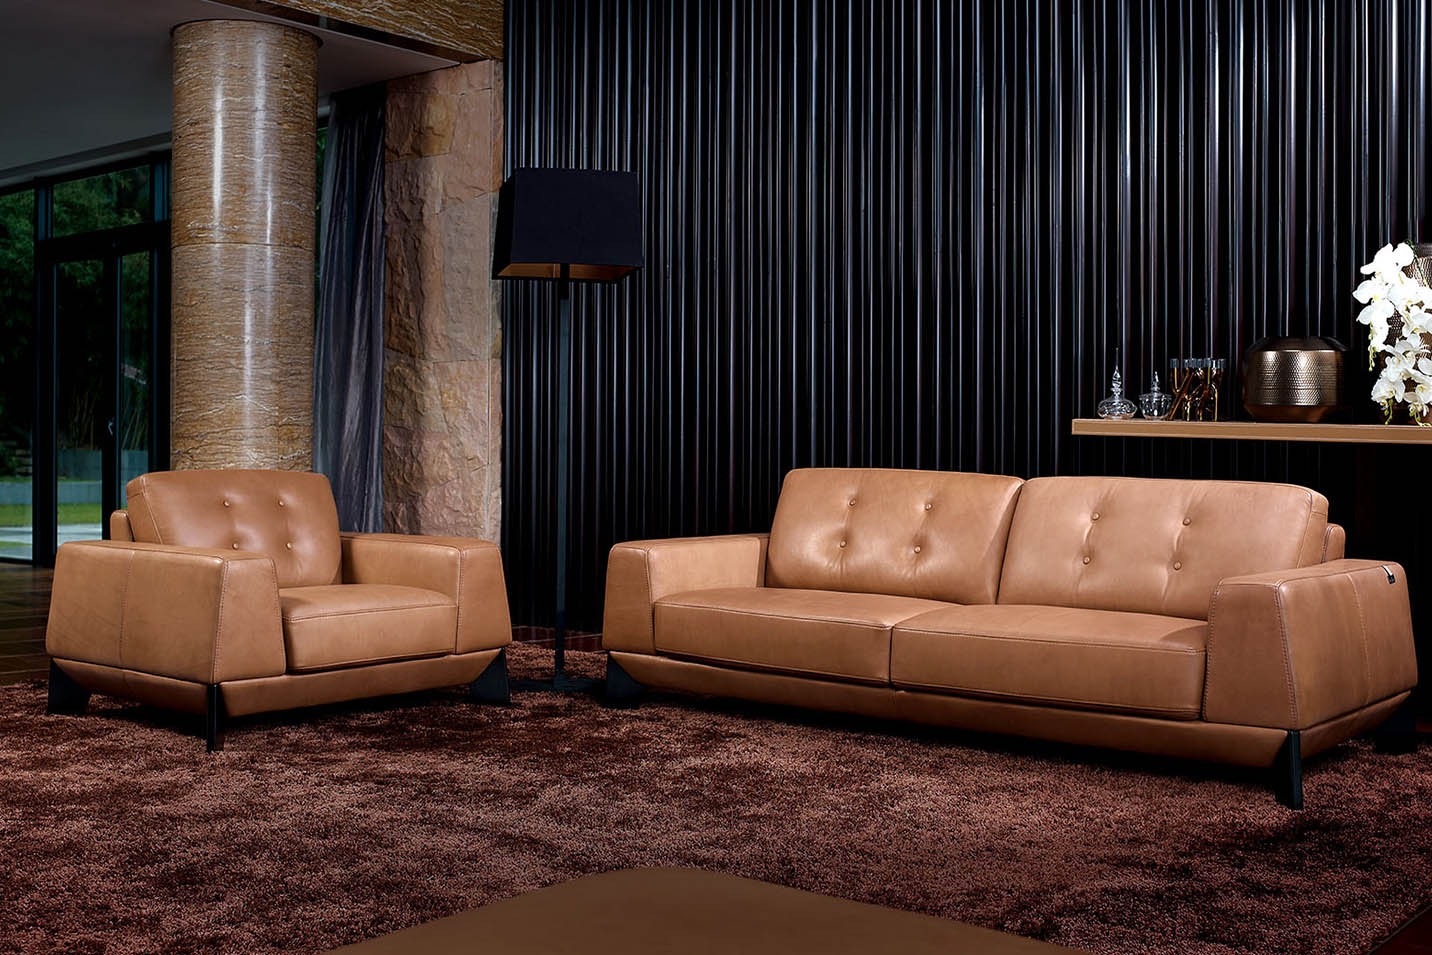 Luxurious Leather Furniture